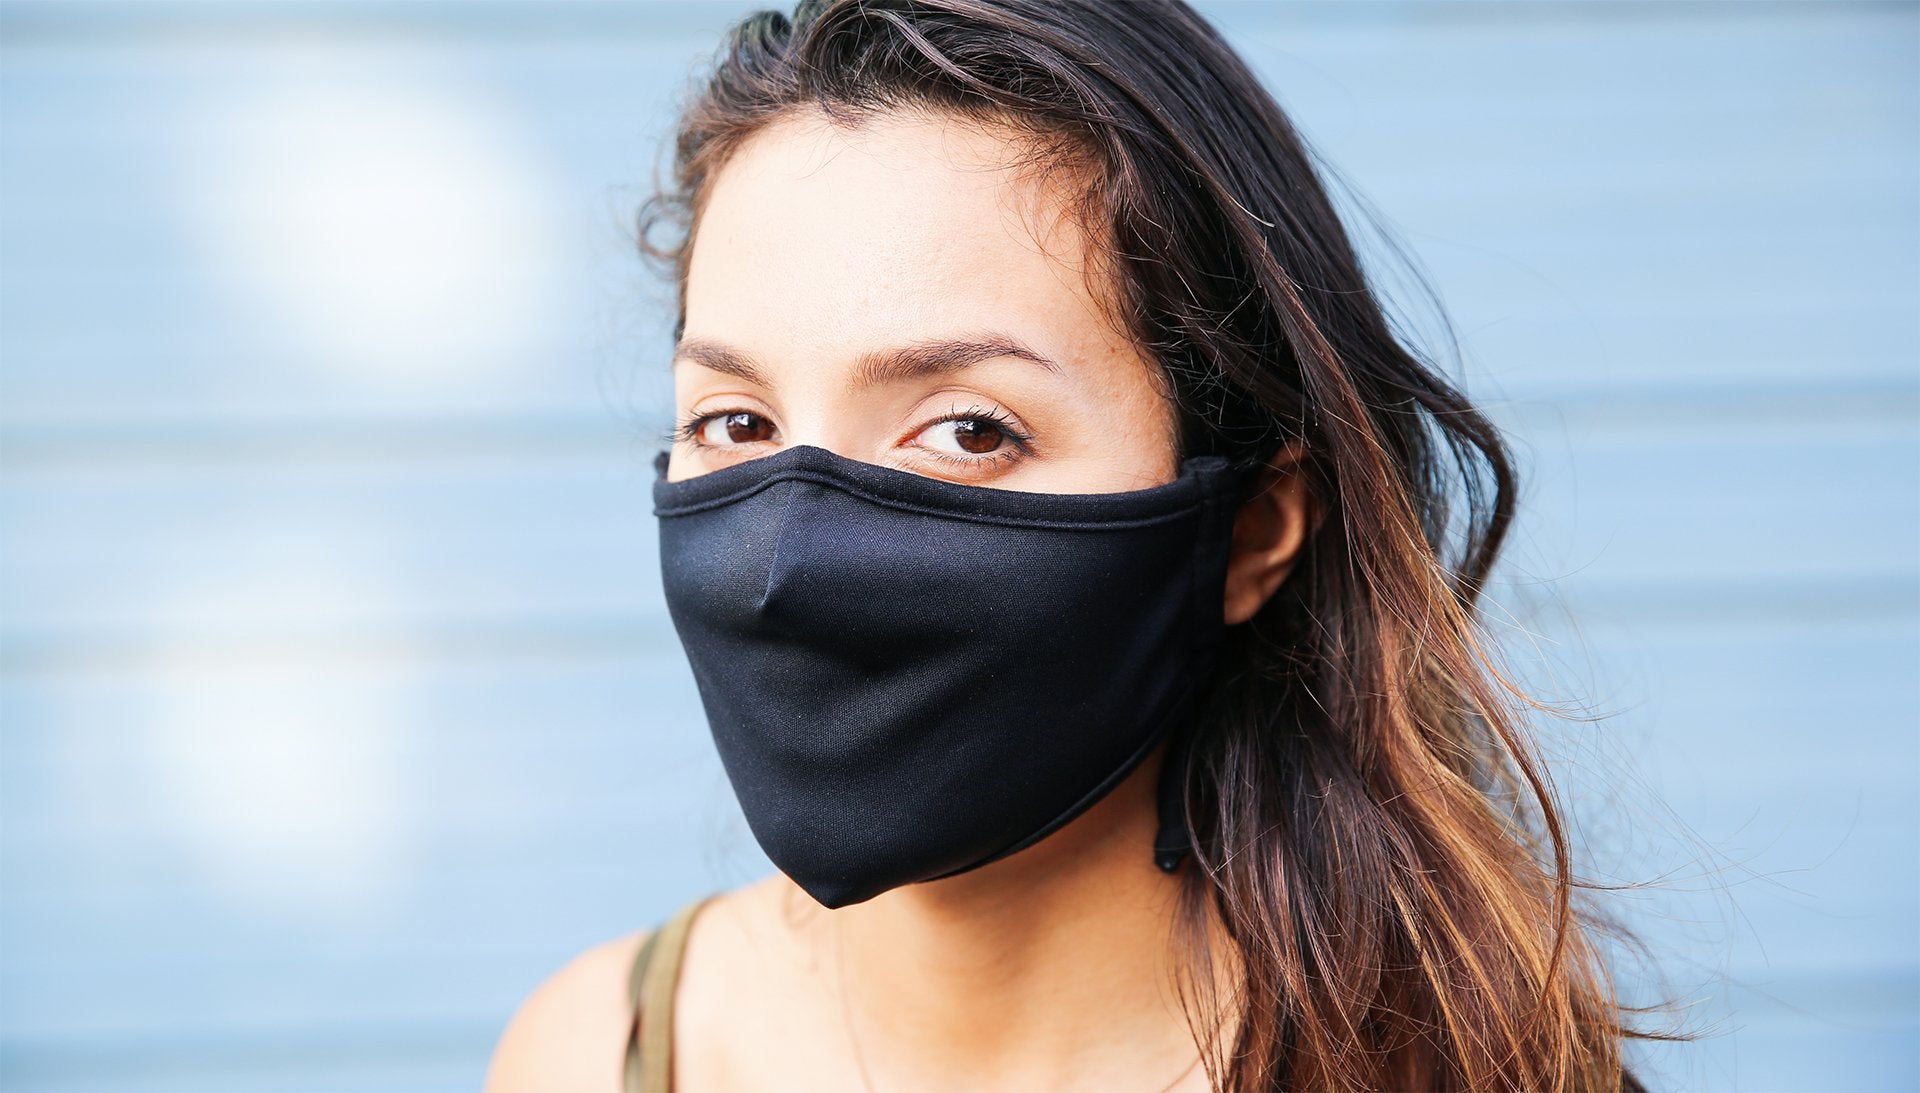 What Questions About Face Mask Standards Should You Ask Your Supplier?